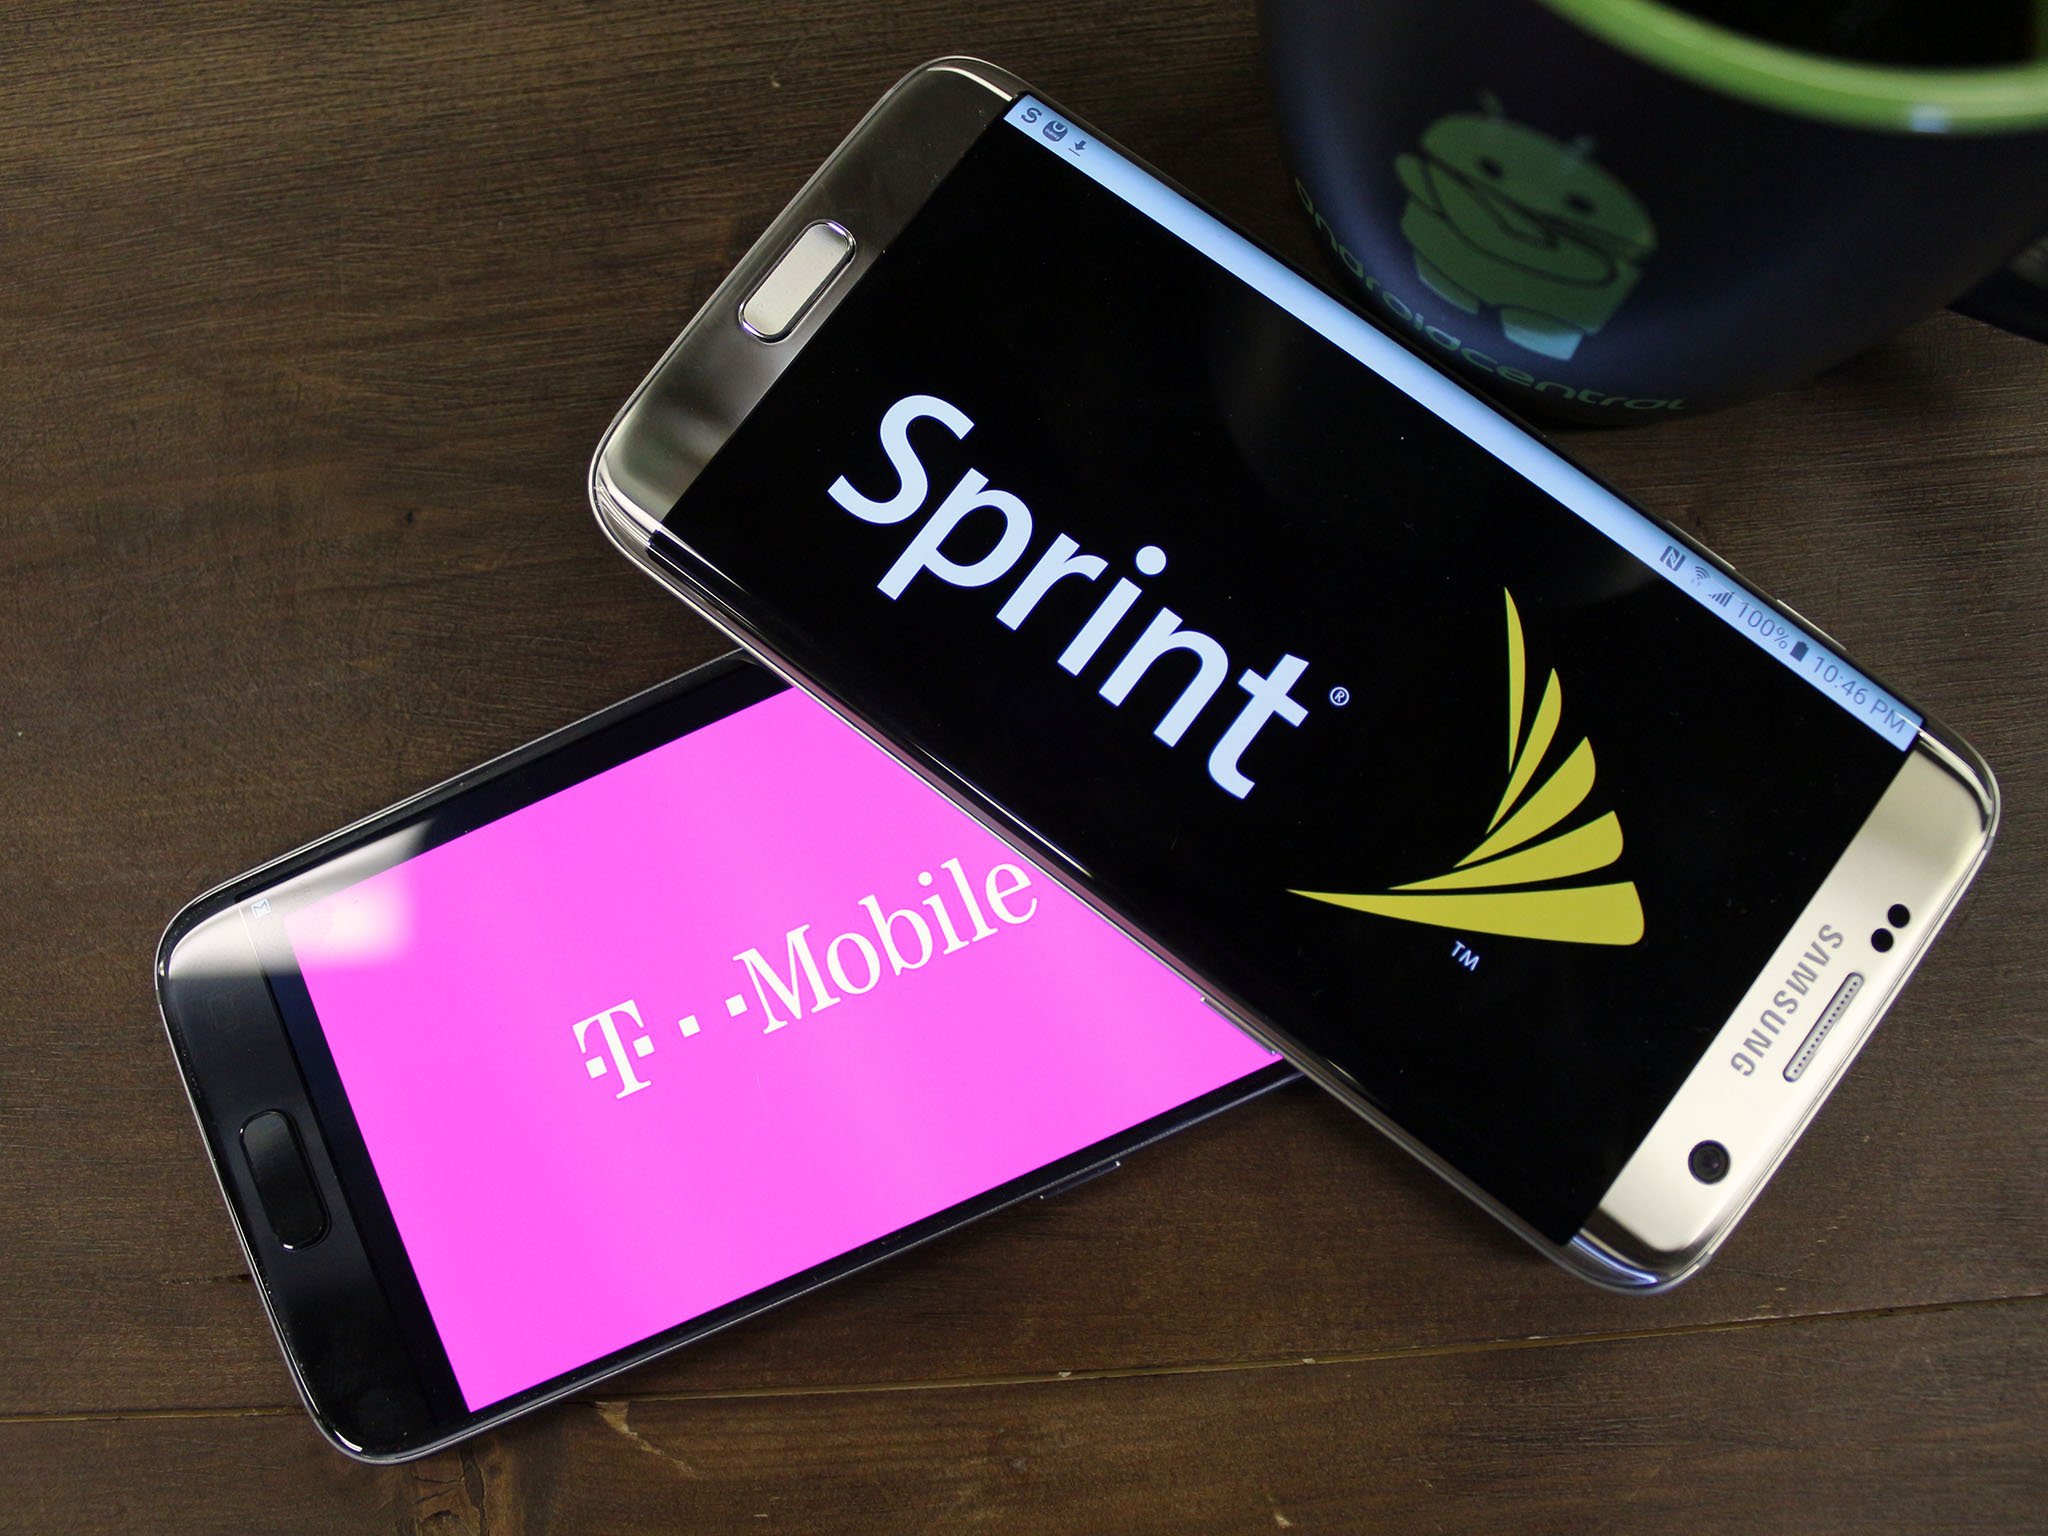 T-Mobile and Sprint Merger FAQ: The good, the bad, and the ugly